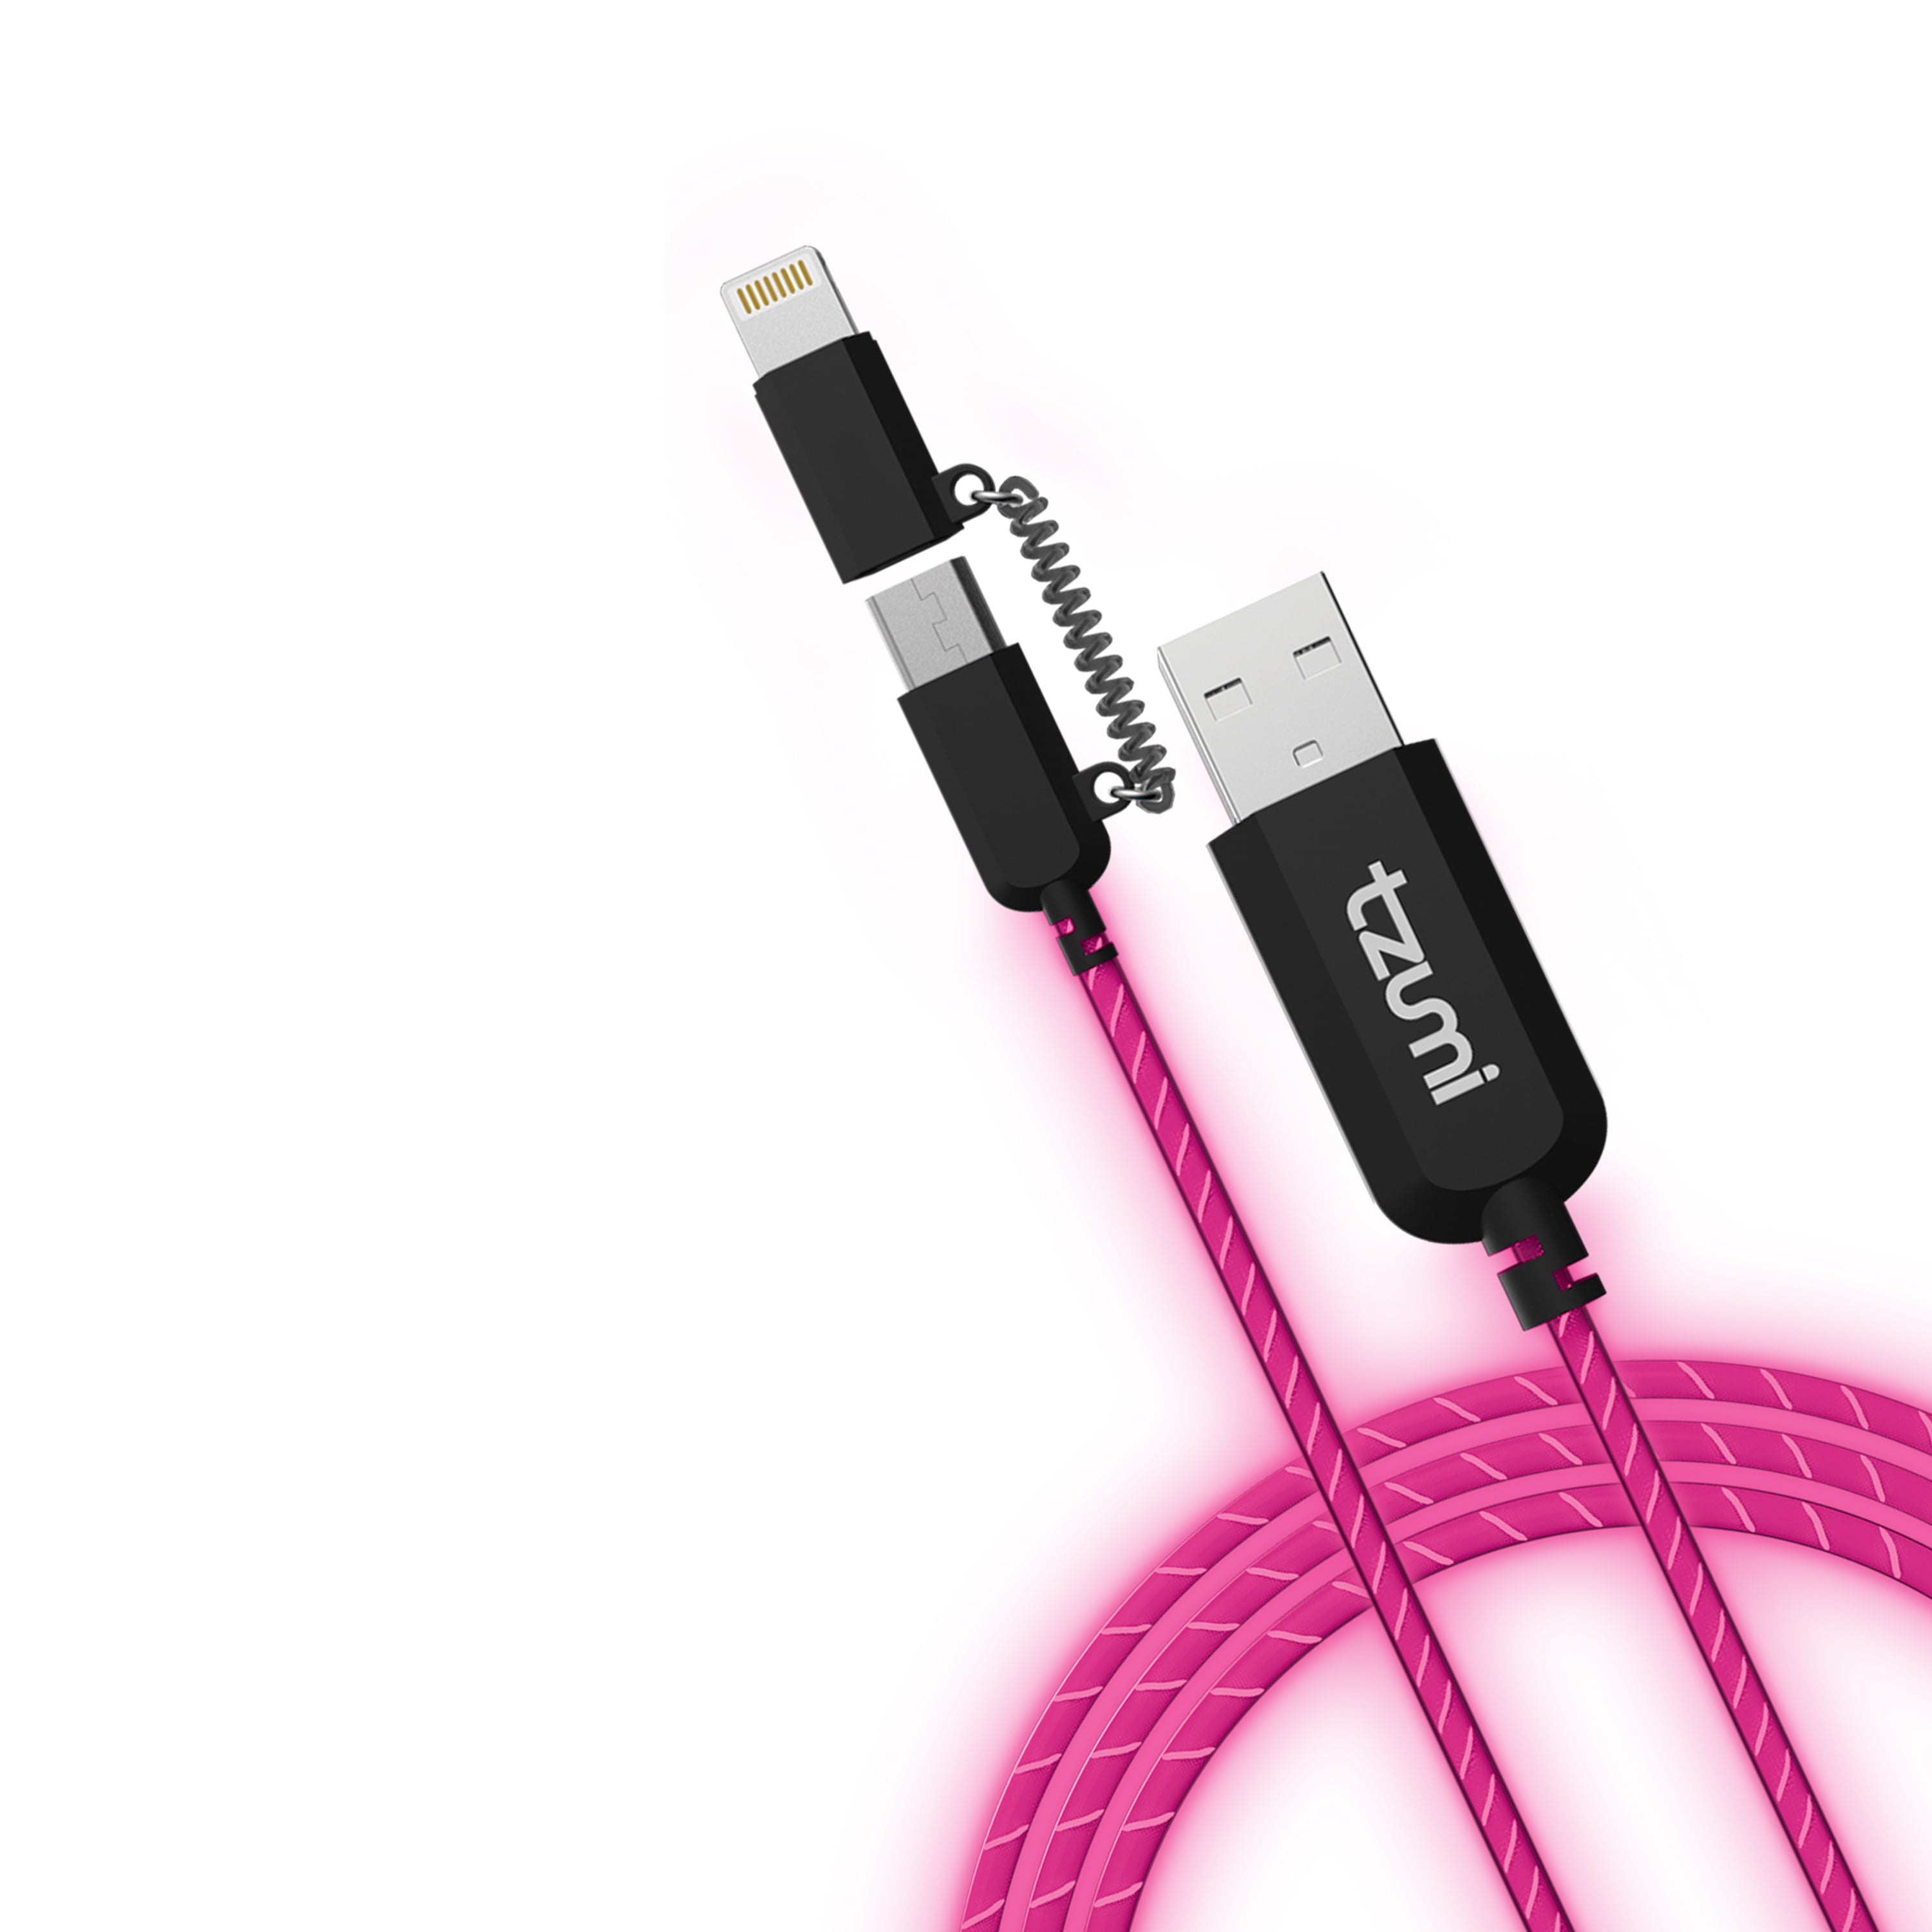 Multi Charging Cable Portable 3 in 1 Pink Pattern with Sliced Pitaya Dragon USB Power Cords for Cell Phone Tablets and More Devices Charging 